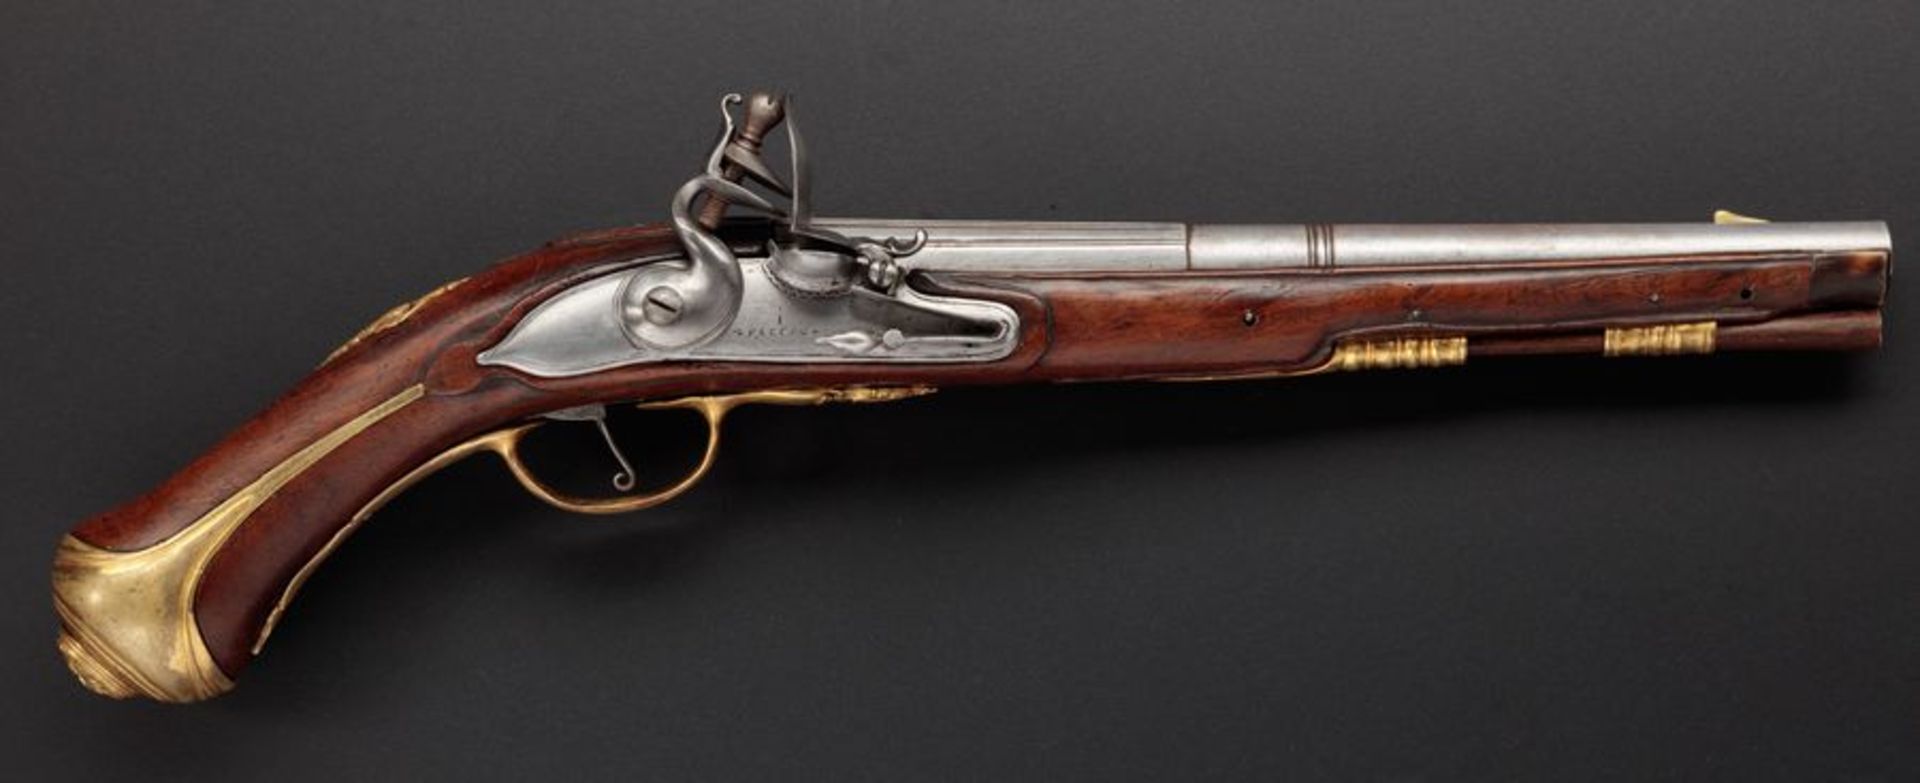 French pistol with intlock, circa 1800. Overall length - 46.4 cm; barrel - 27.4 cm; [...]